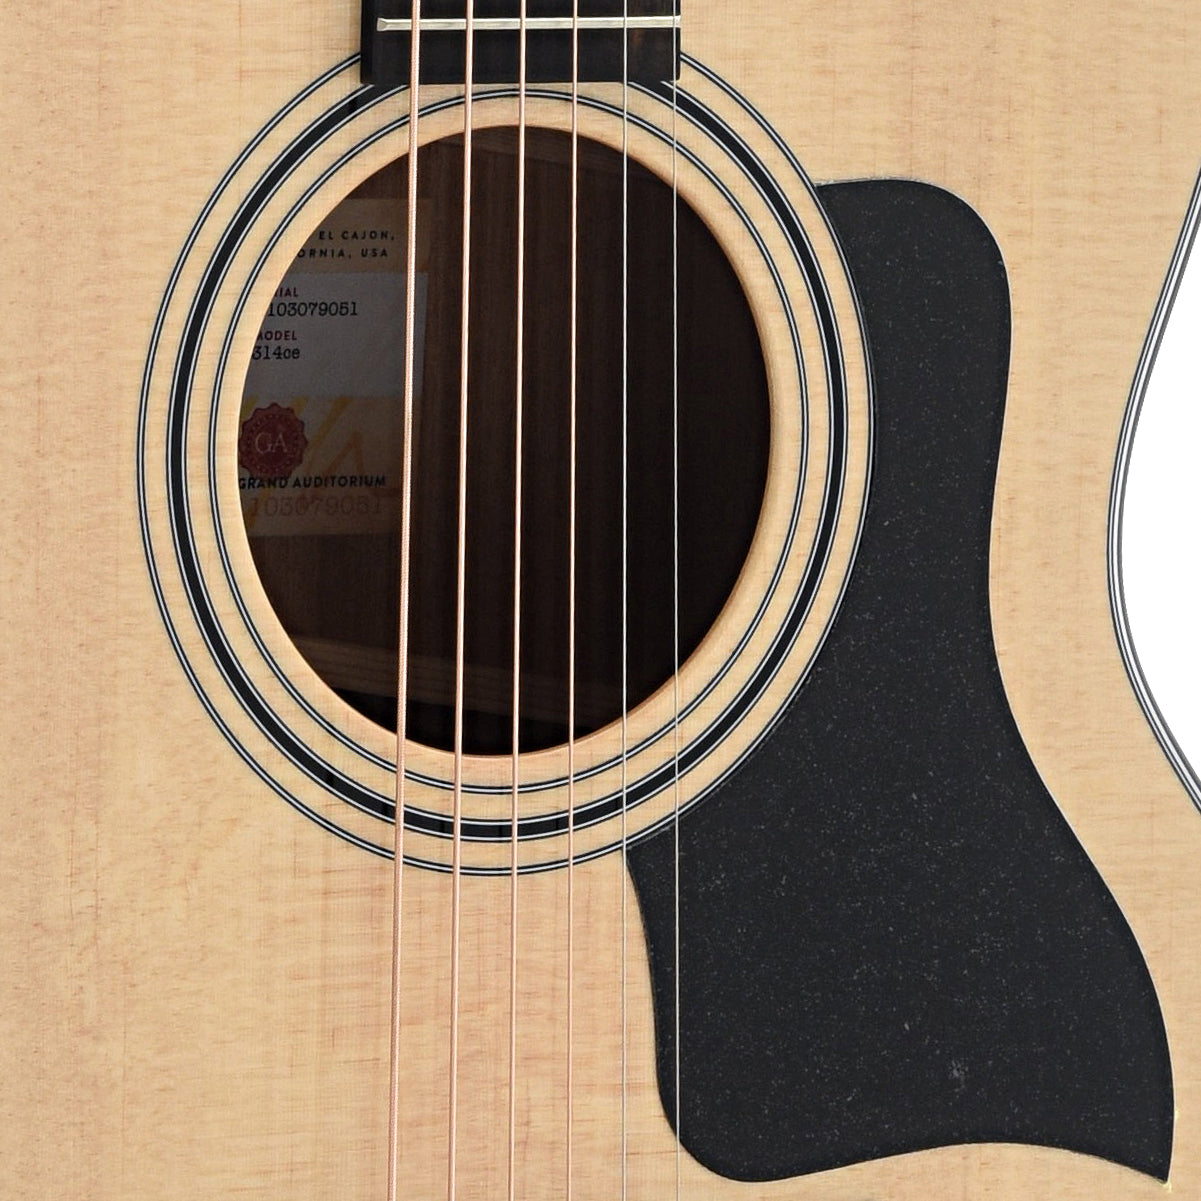 Soundhole and Pickguard of Taylor 314ce Acoustic Guitar